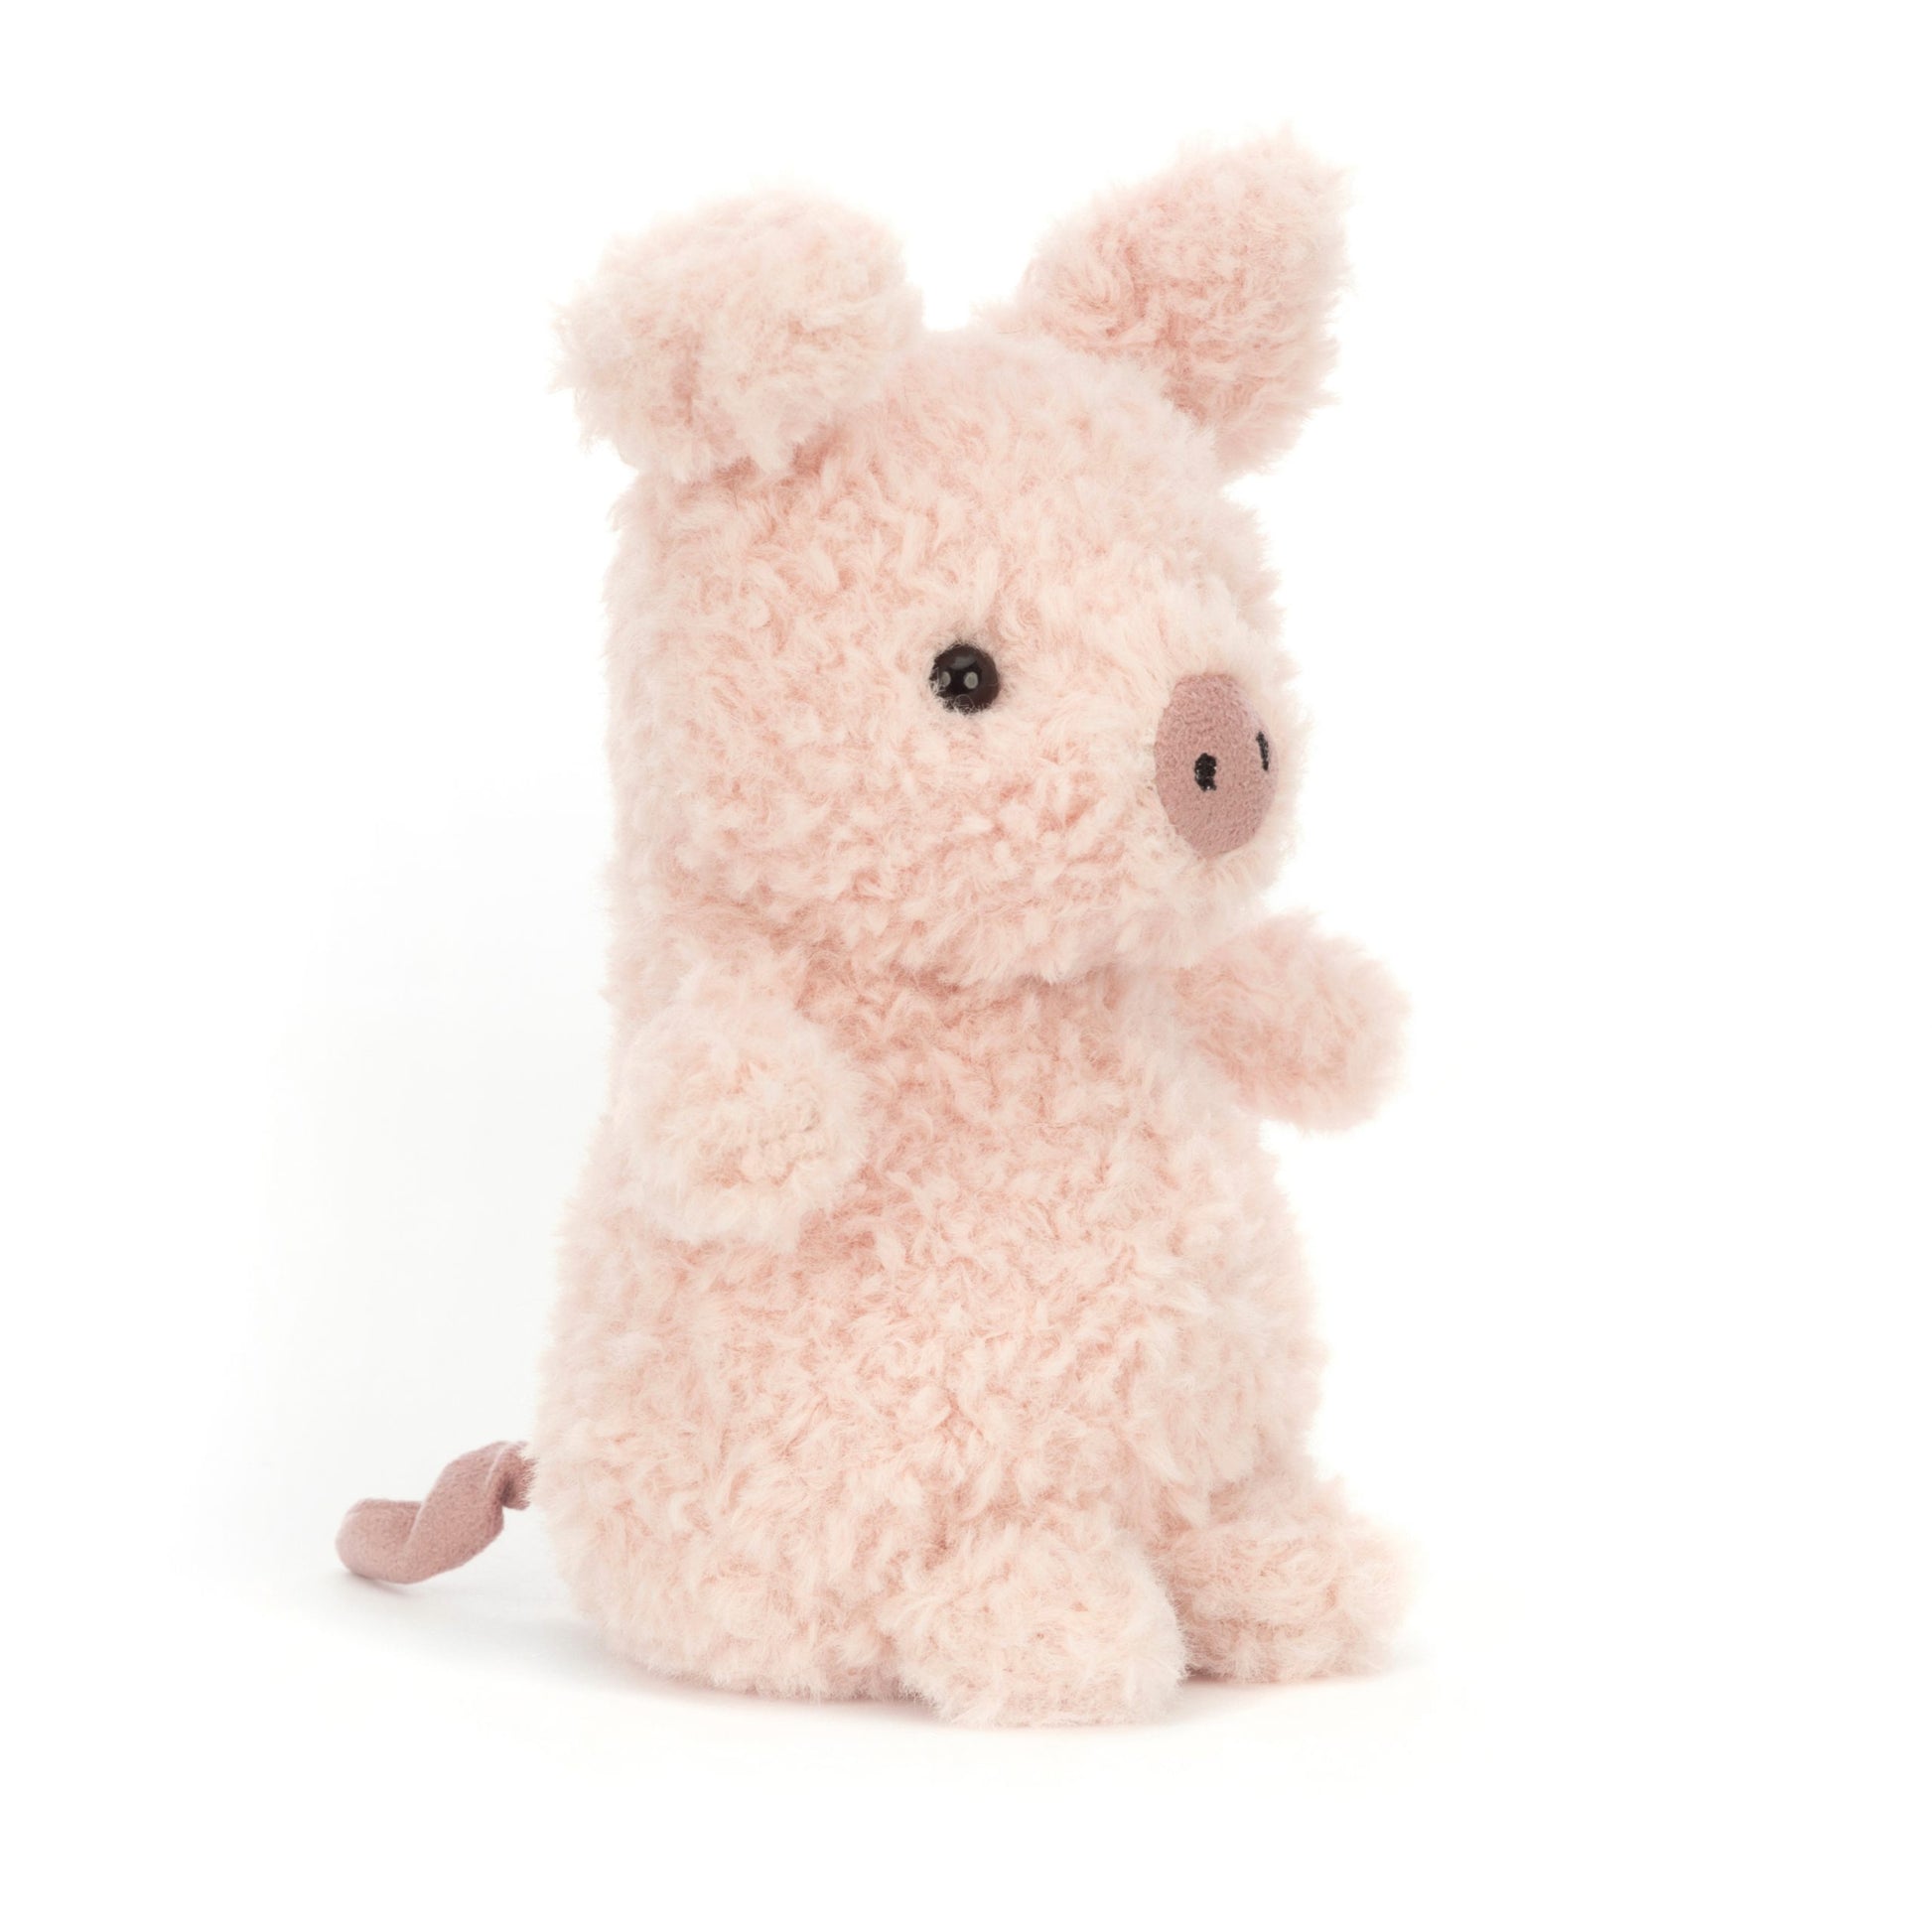 Jellycat Wee Pig